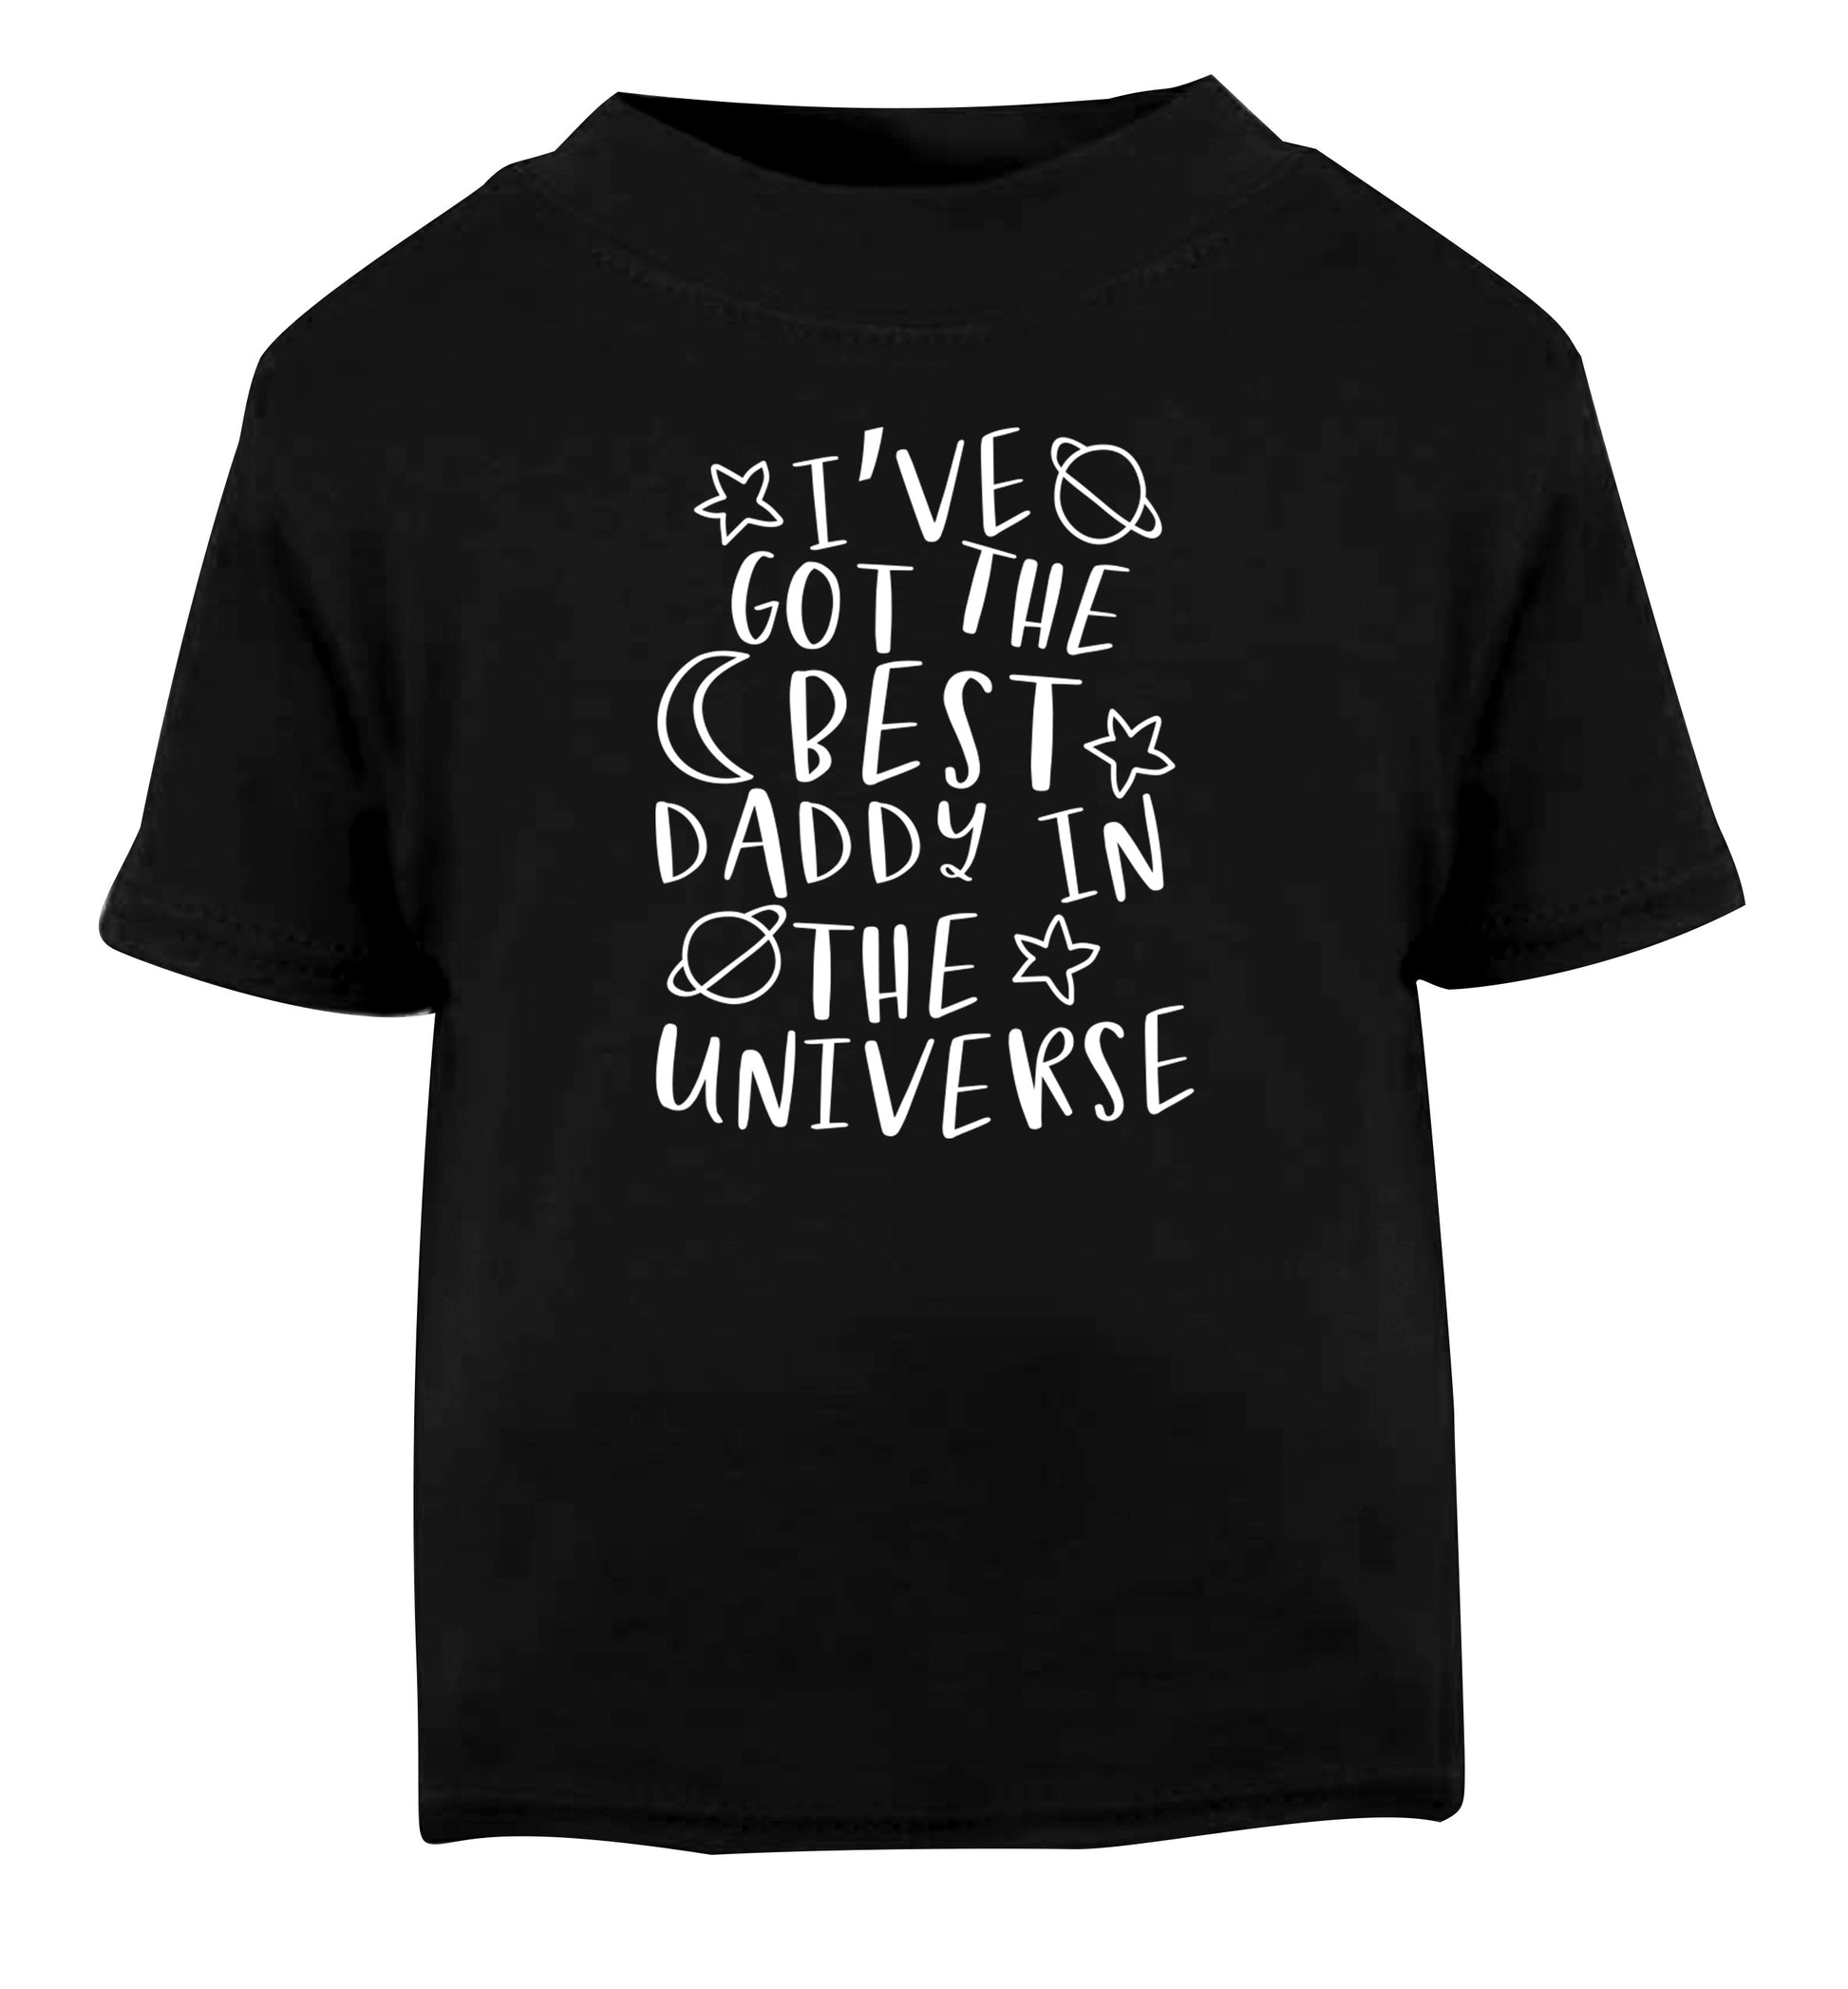 I've got the best daddy in the universe Black Baby Toddler Tshirt 2 years